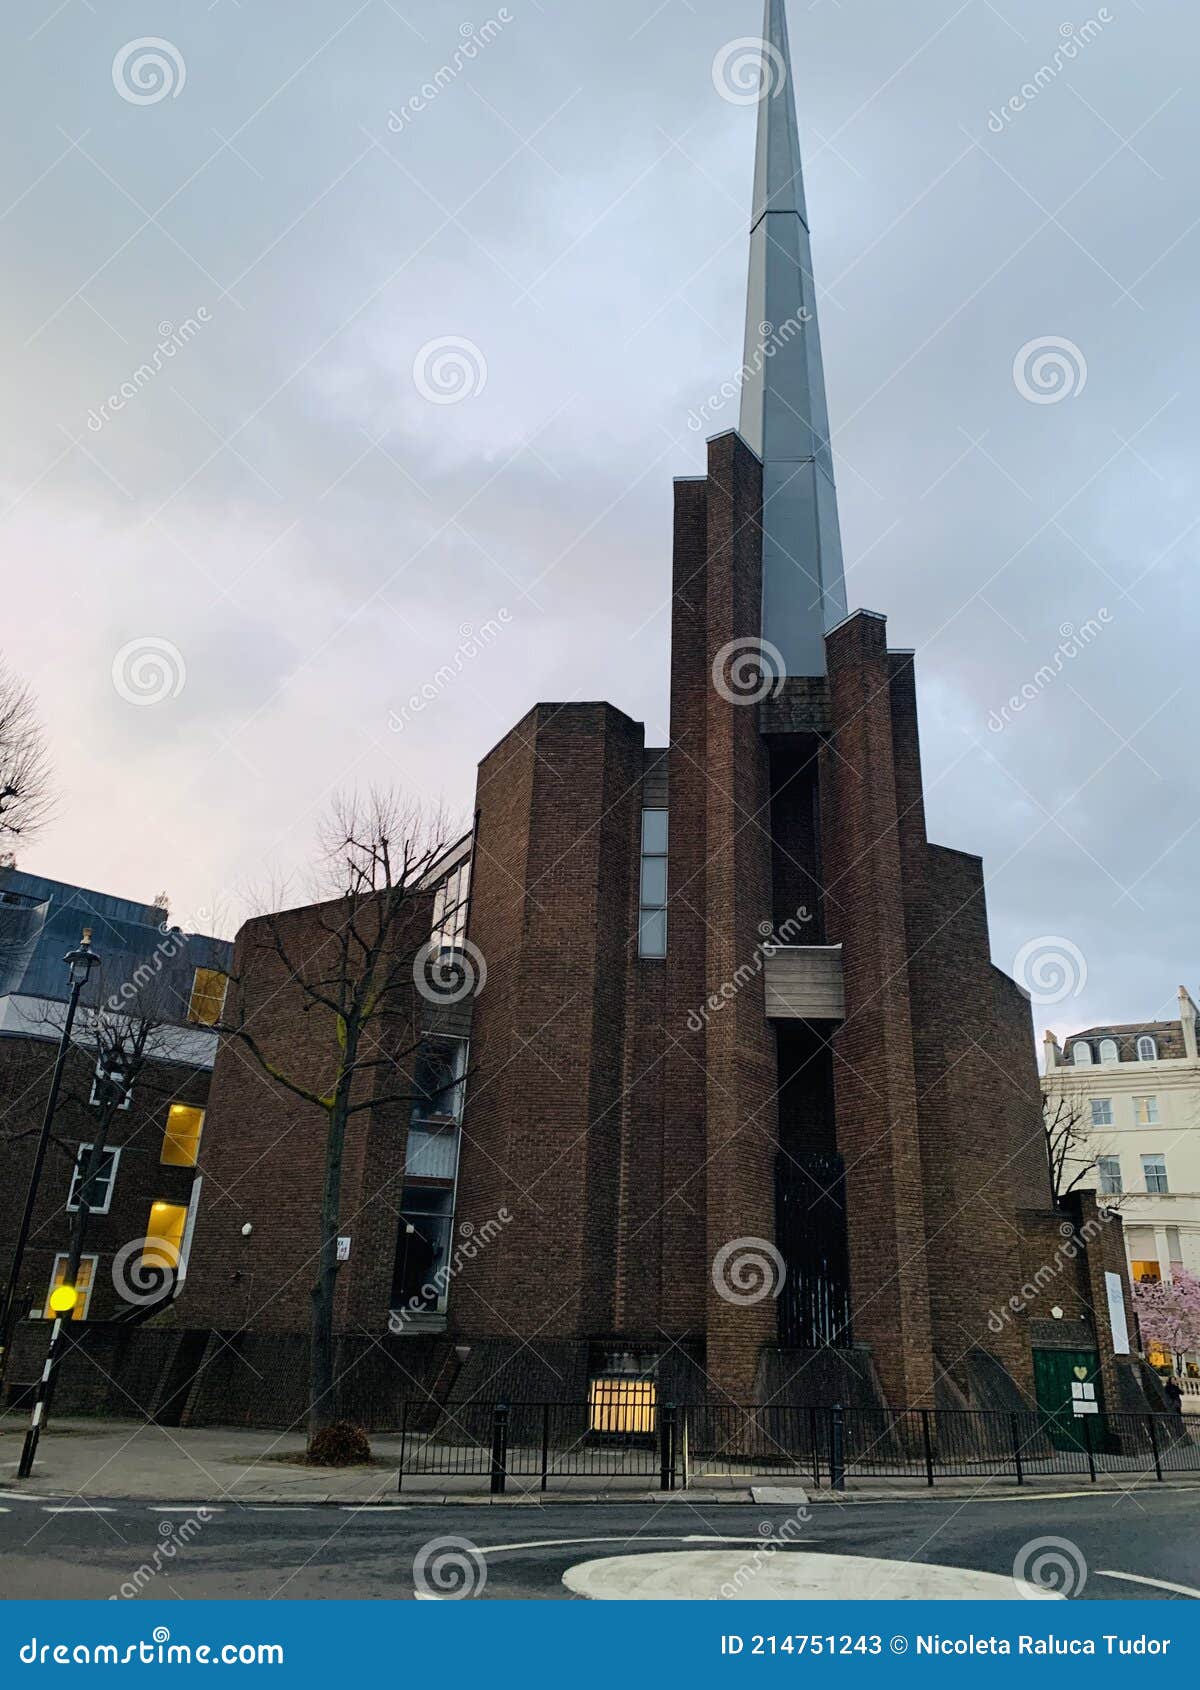 St Saviour's Is A Striking, Angular And Soaring 1976 Brick Church Adjacent To Warwick Avenue Underground Station In London Editorial Stock Photo - Image Of Consecrated, Formosa: 214751243